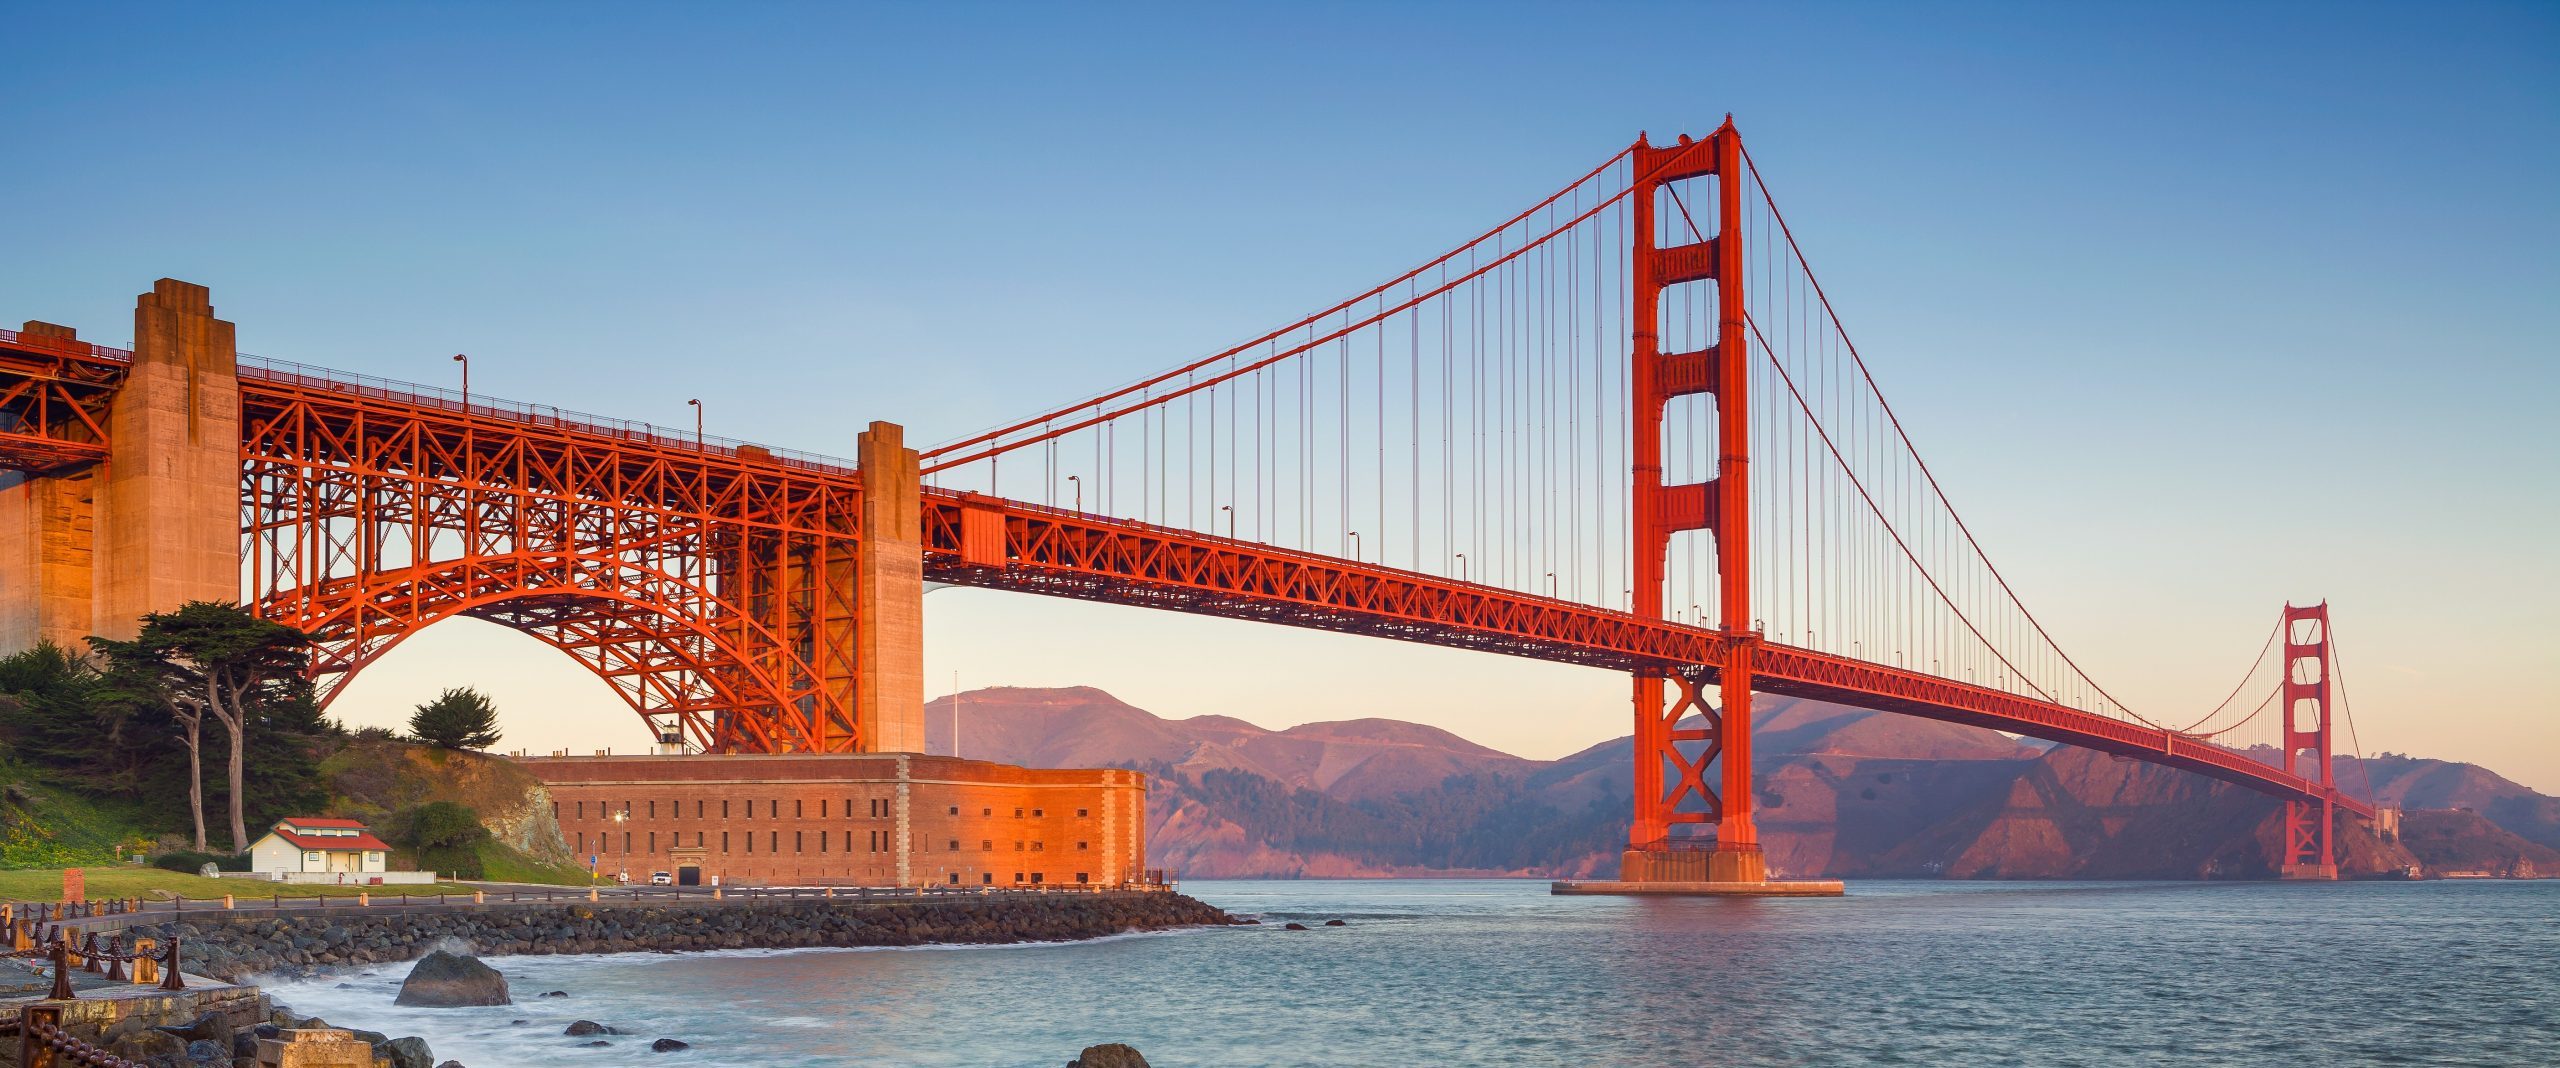 Best Spots to Snap a Pic of the Golden Gate Bridge on your San Francisco Tour